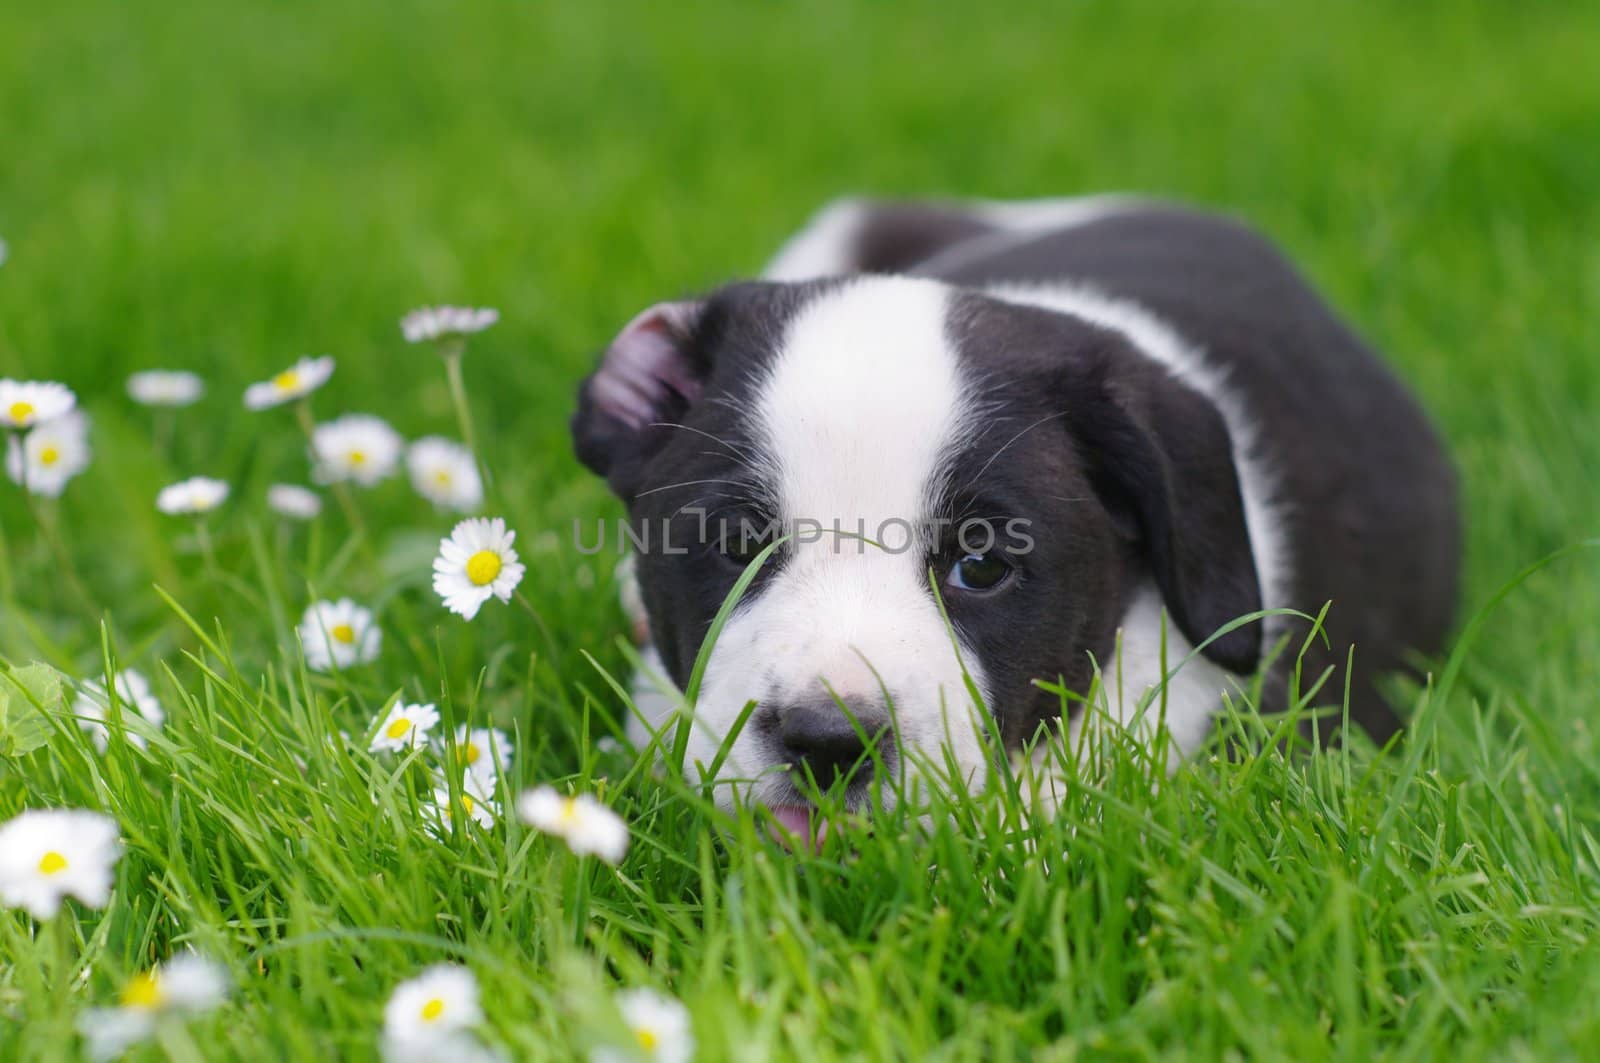 cute puppies in the meadow in spring time